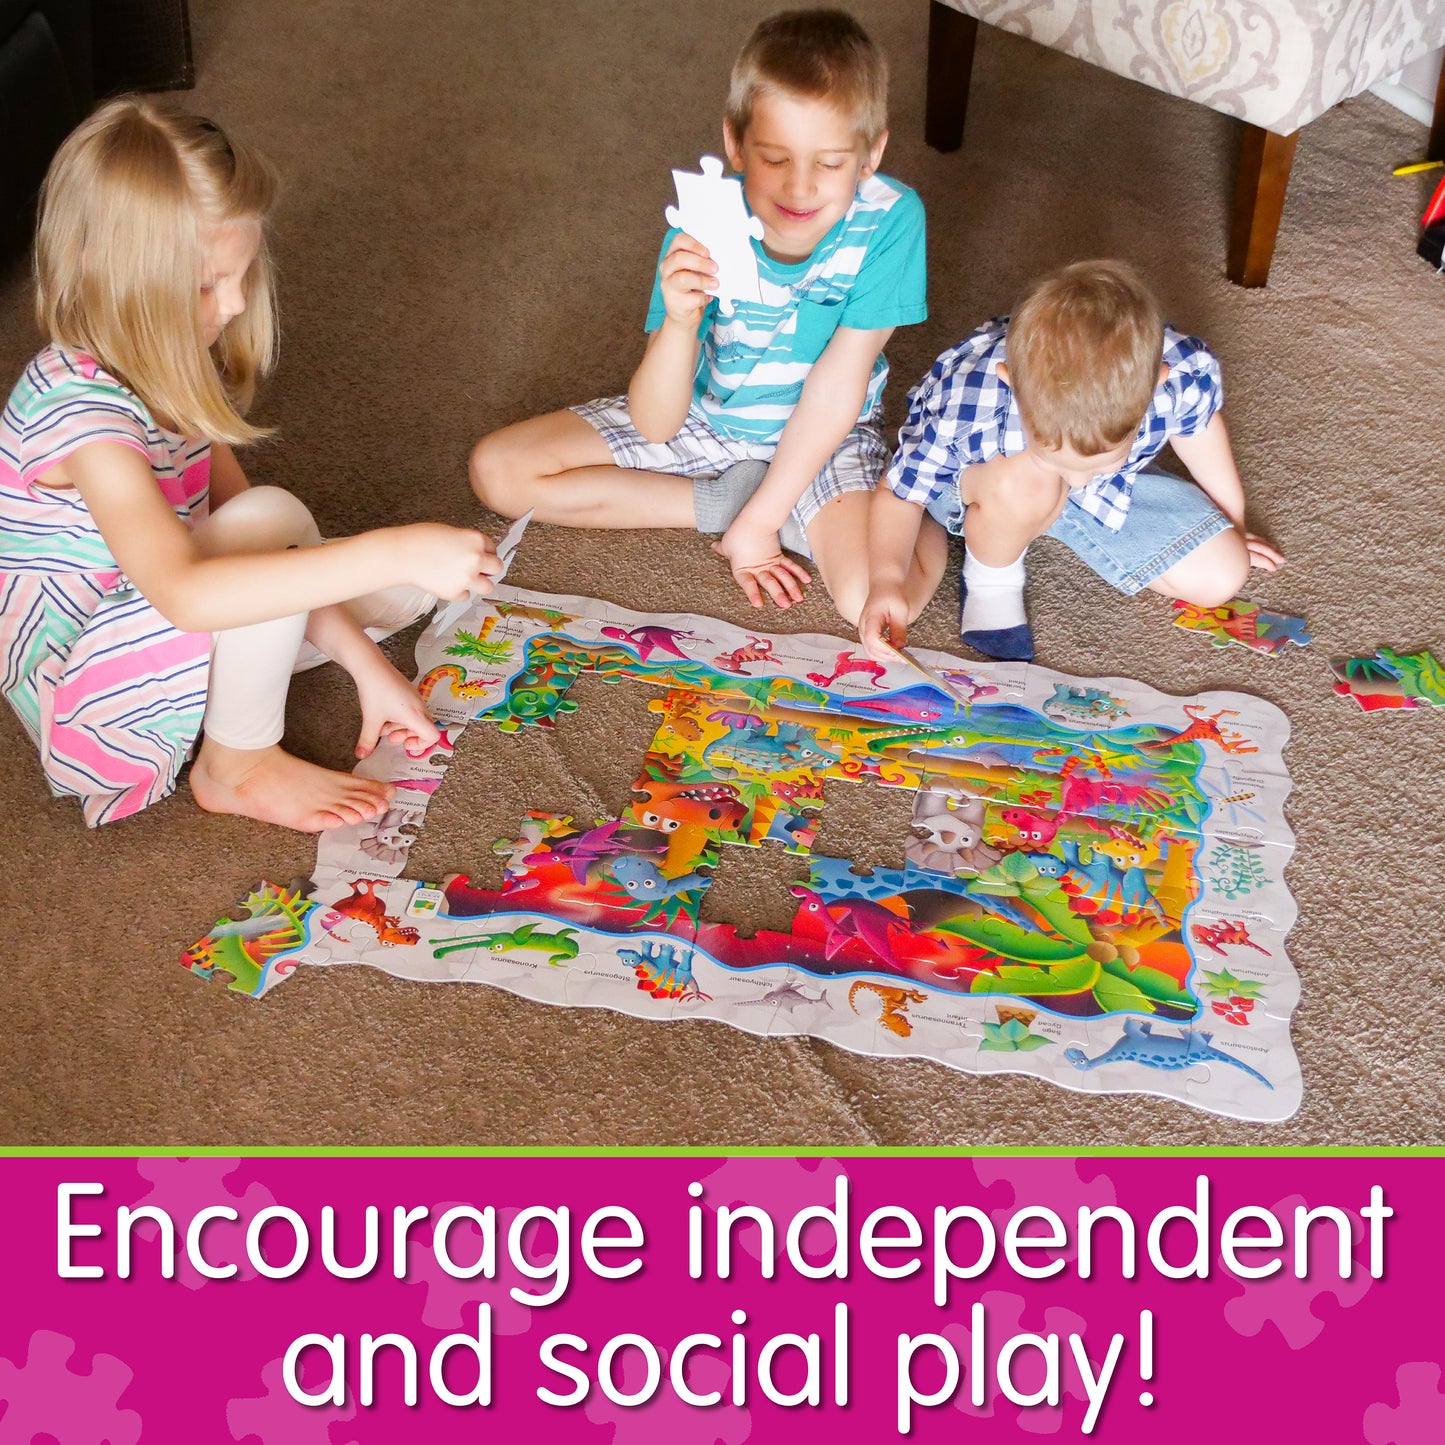 Infographic about Find It - Dino that says, "Encourage independent and social play!"